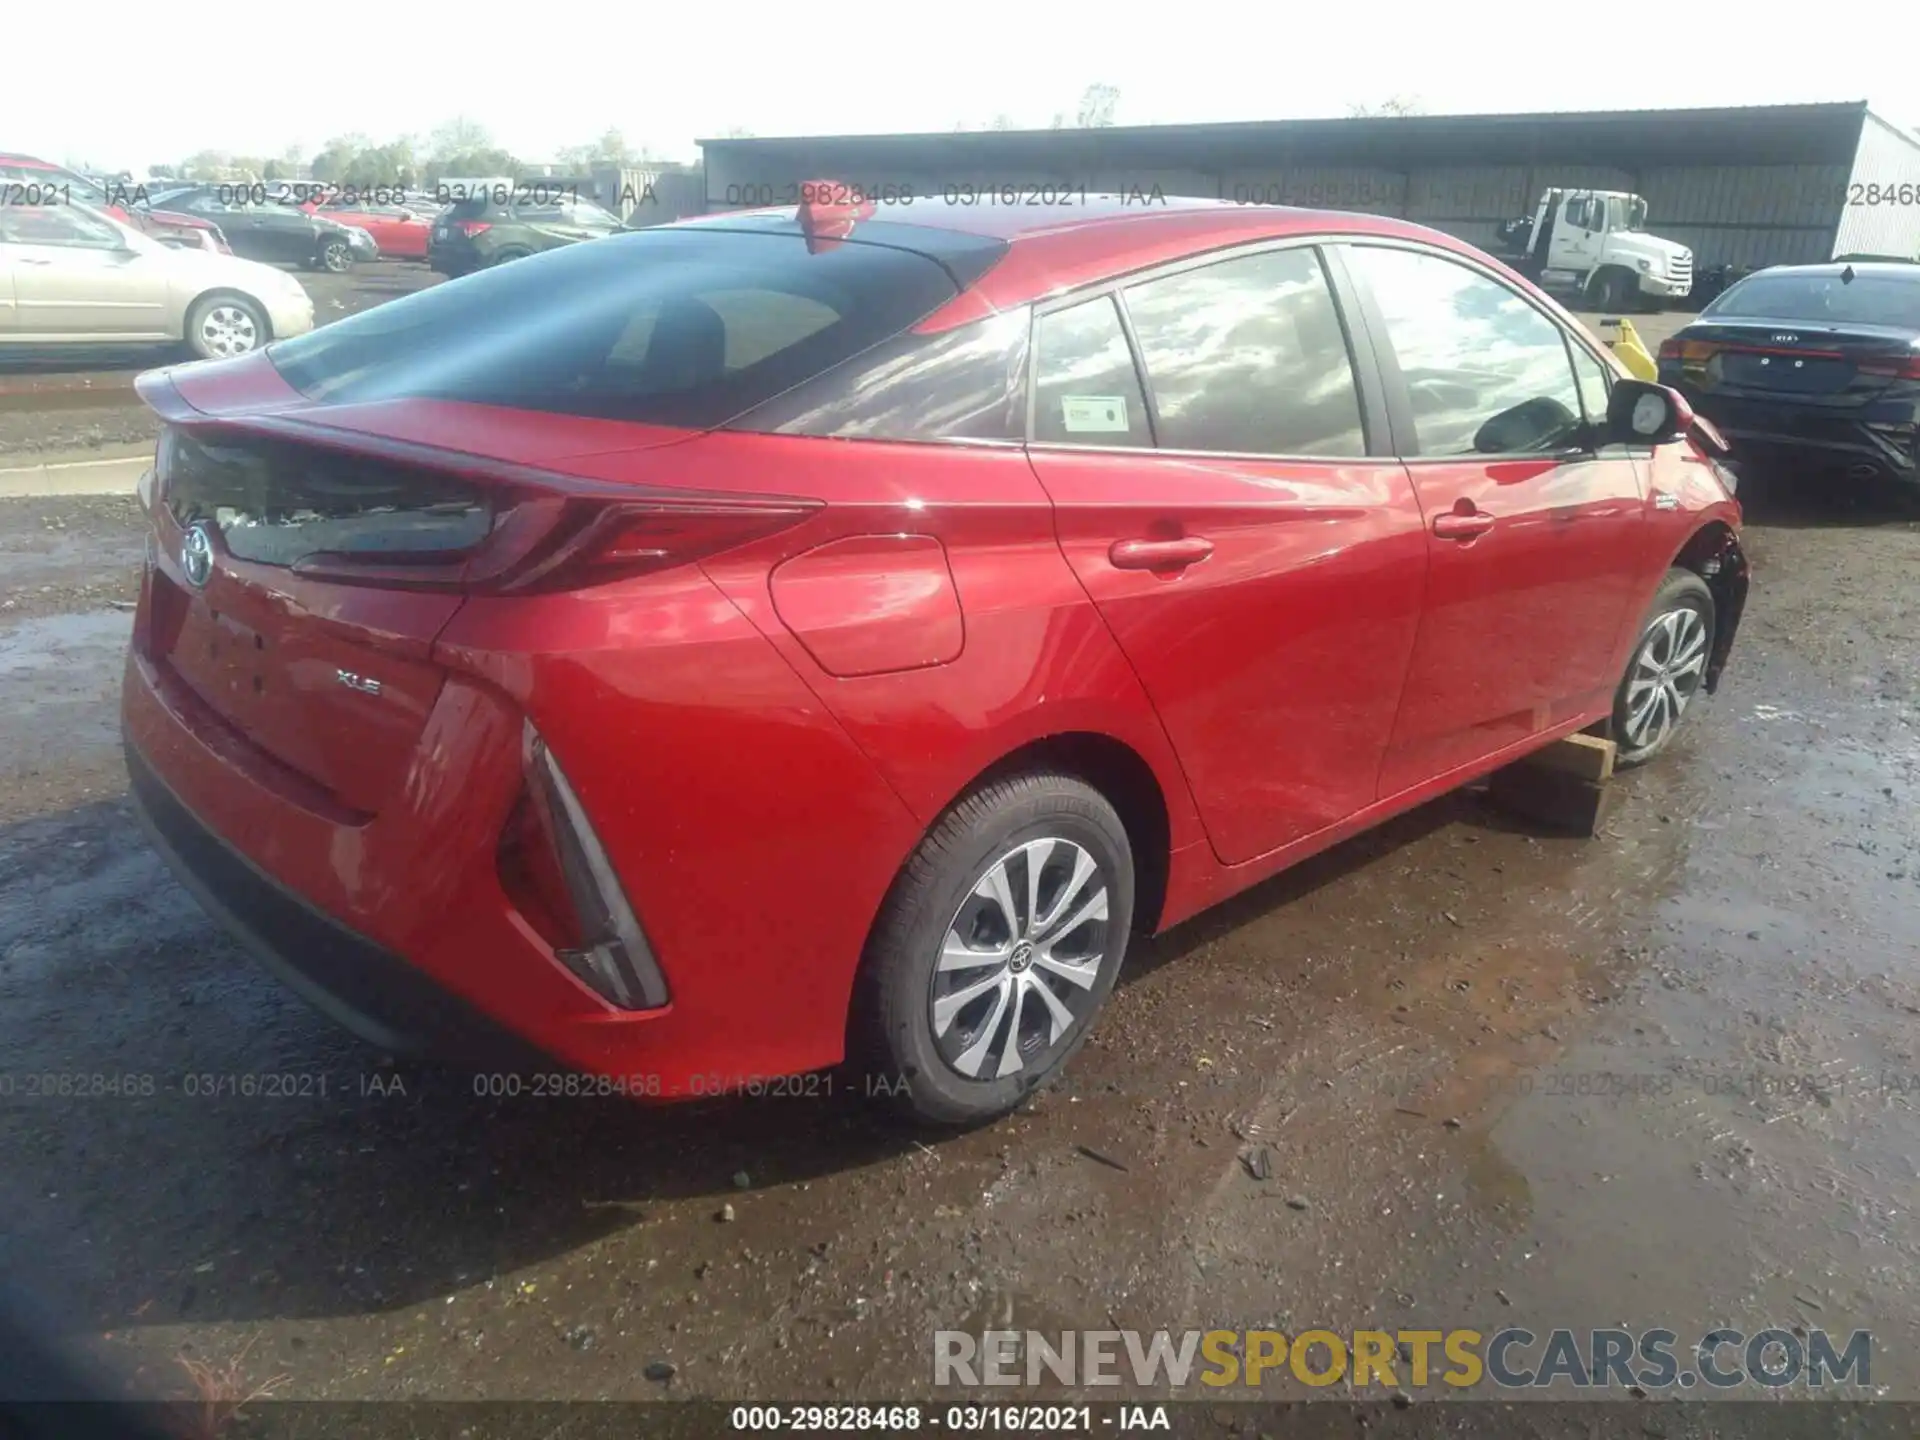 4 Photograph of a damaged car JTDKAMFPXM3170209 TOYOTA PRIUS PRIME 2021